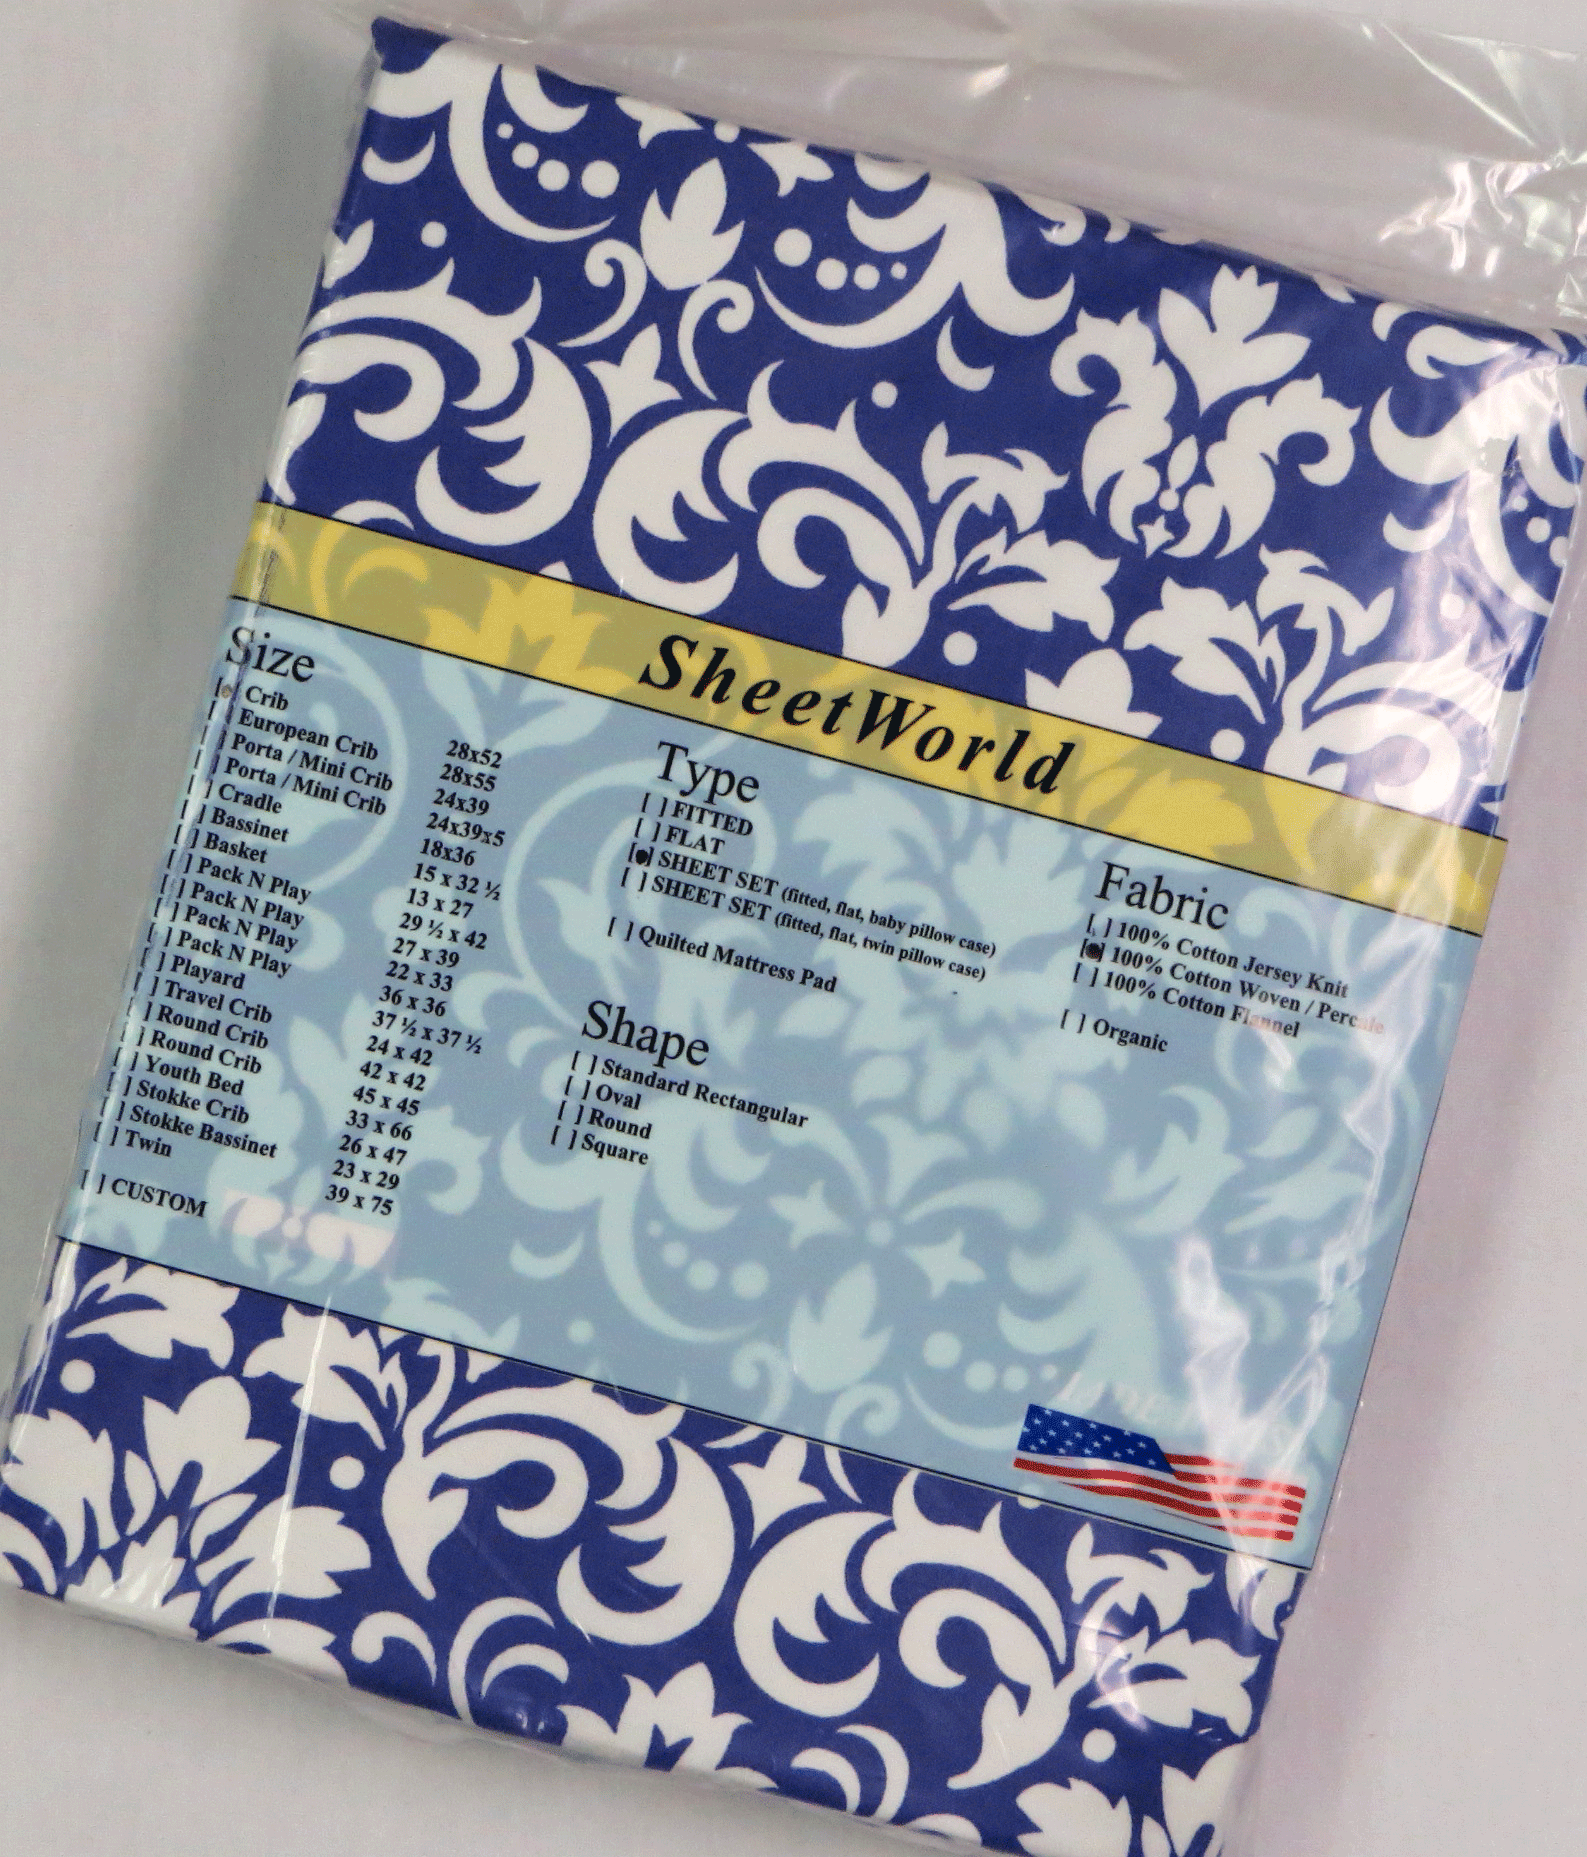 SheetWorld Fitted Cradle Sheet 18 x 36 White Swiss Dot Jersey Knit Made in USA 